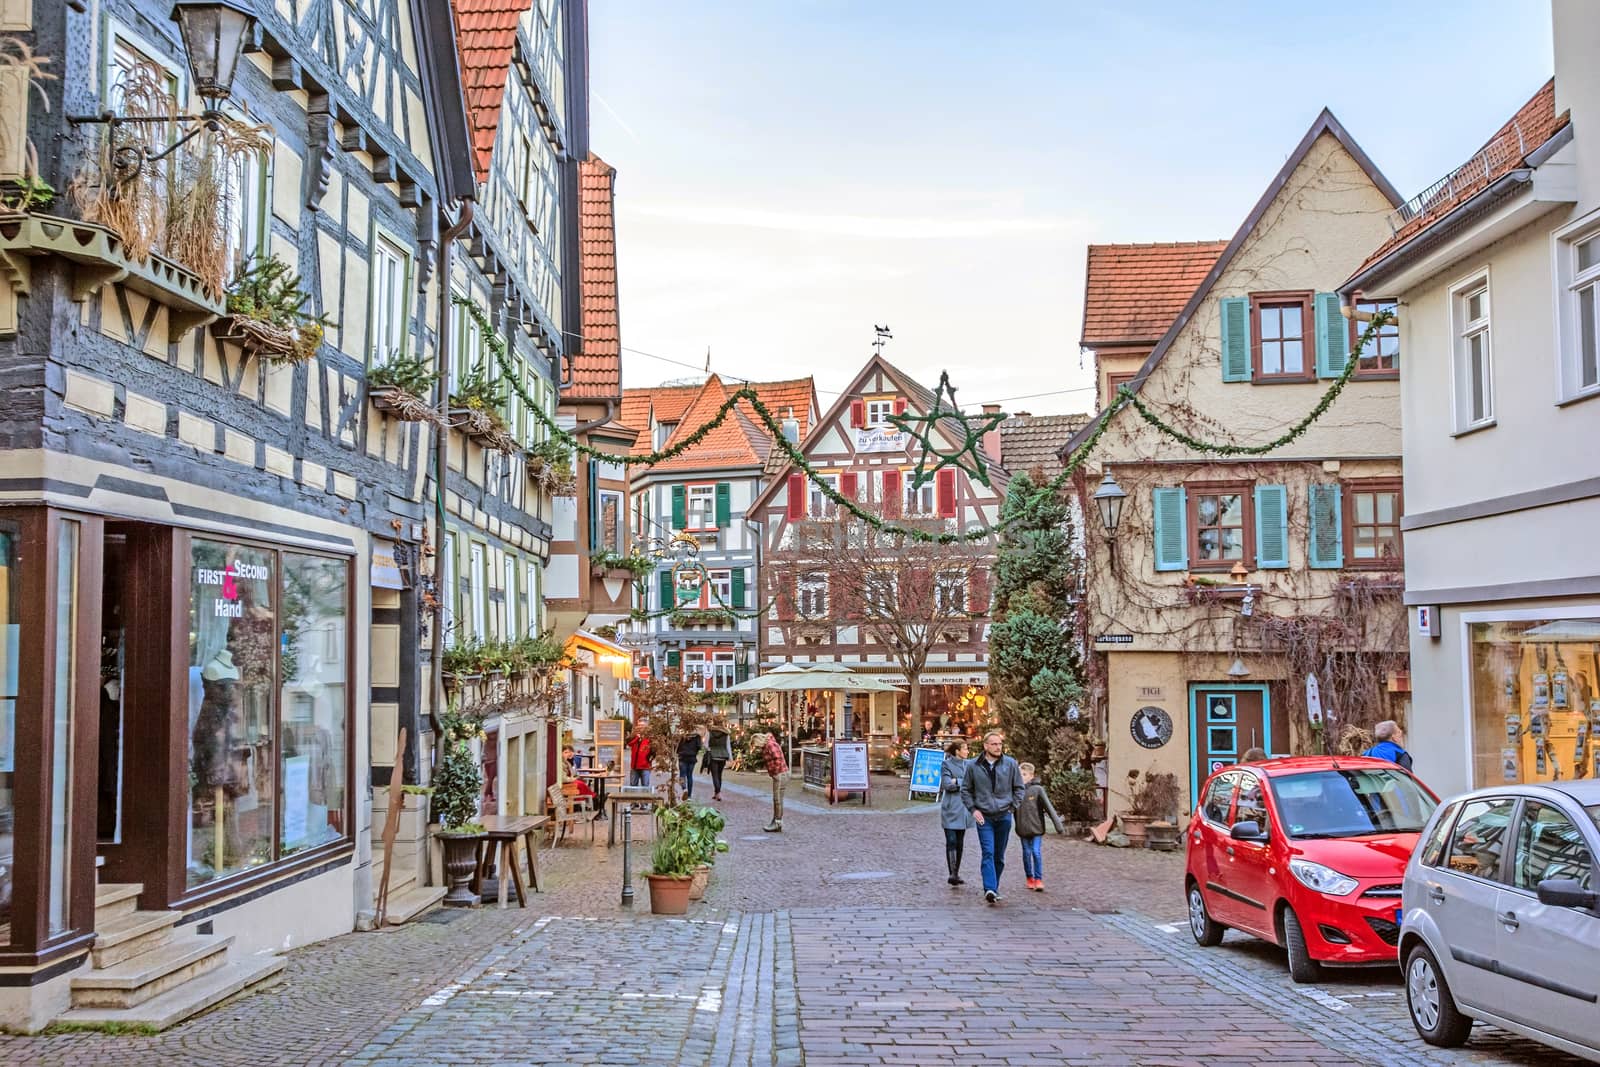 Besigheim, Germany - December 27, 2016: Half-timbered houses in the old historic city district.